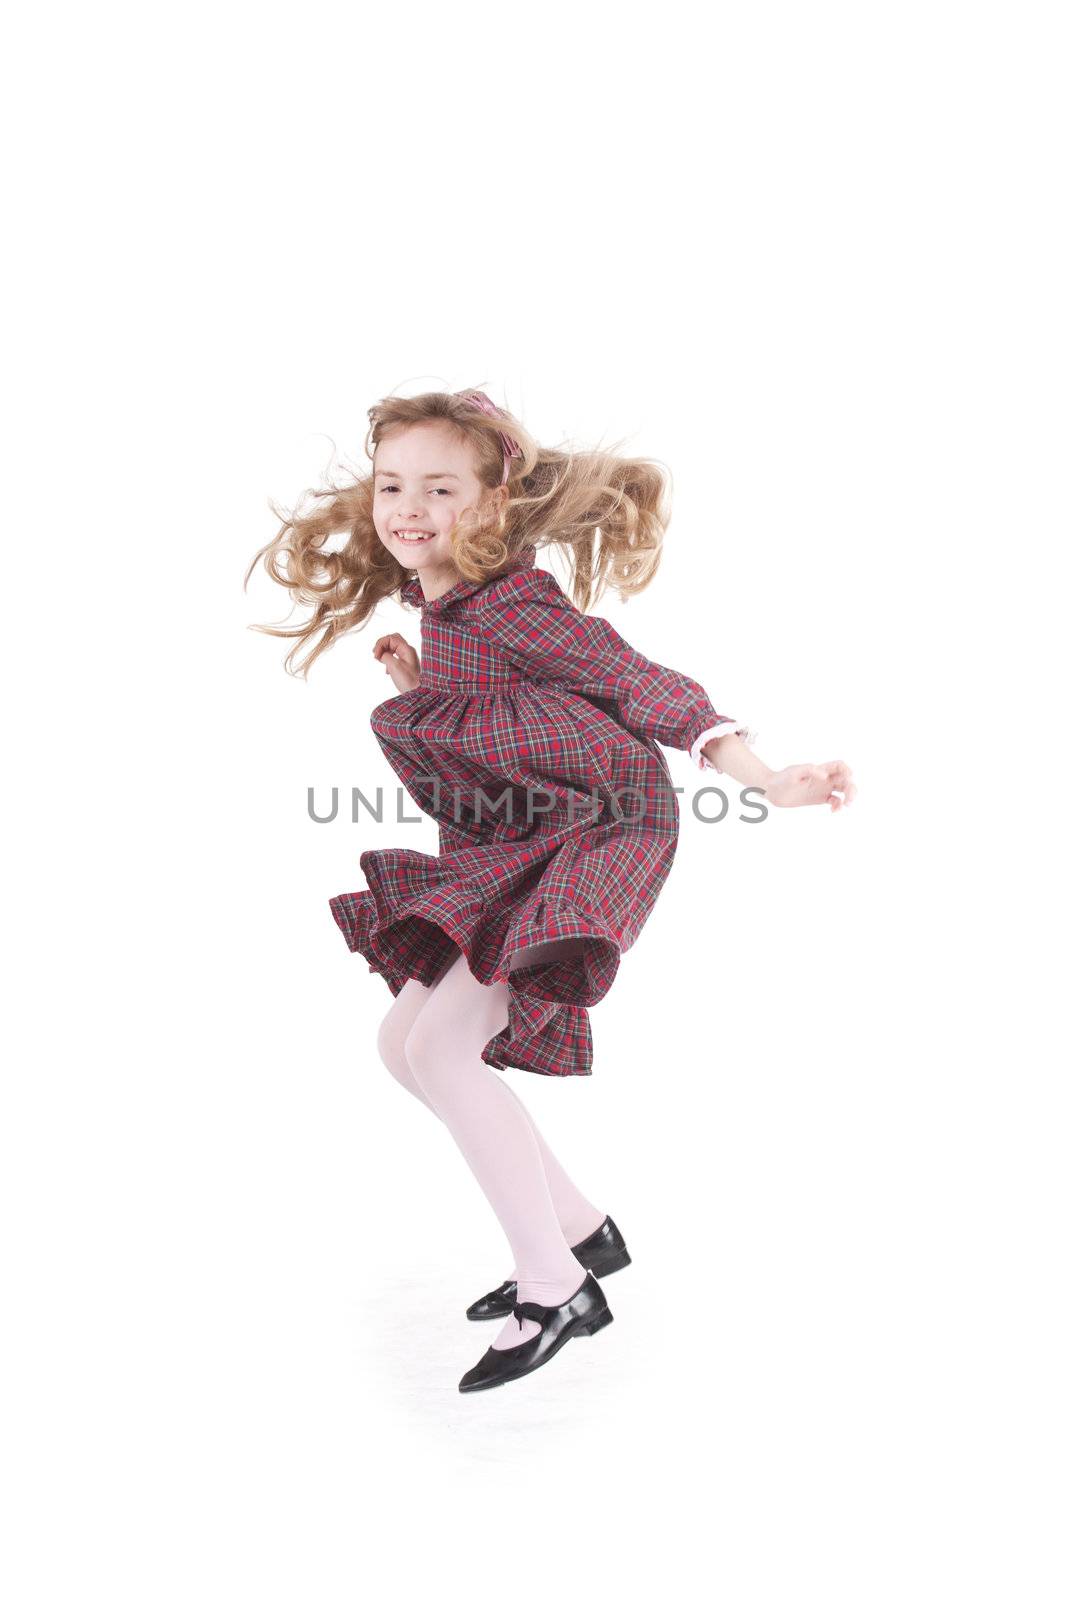 Jumping 7 years old girl by msdnv